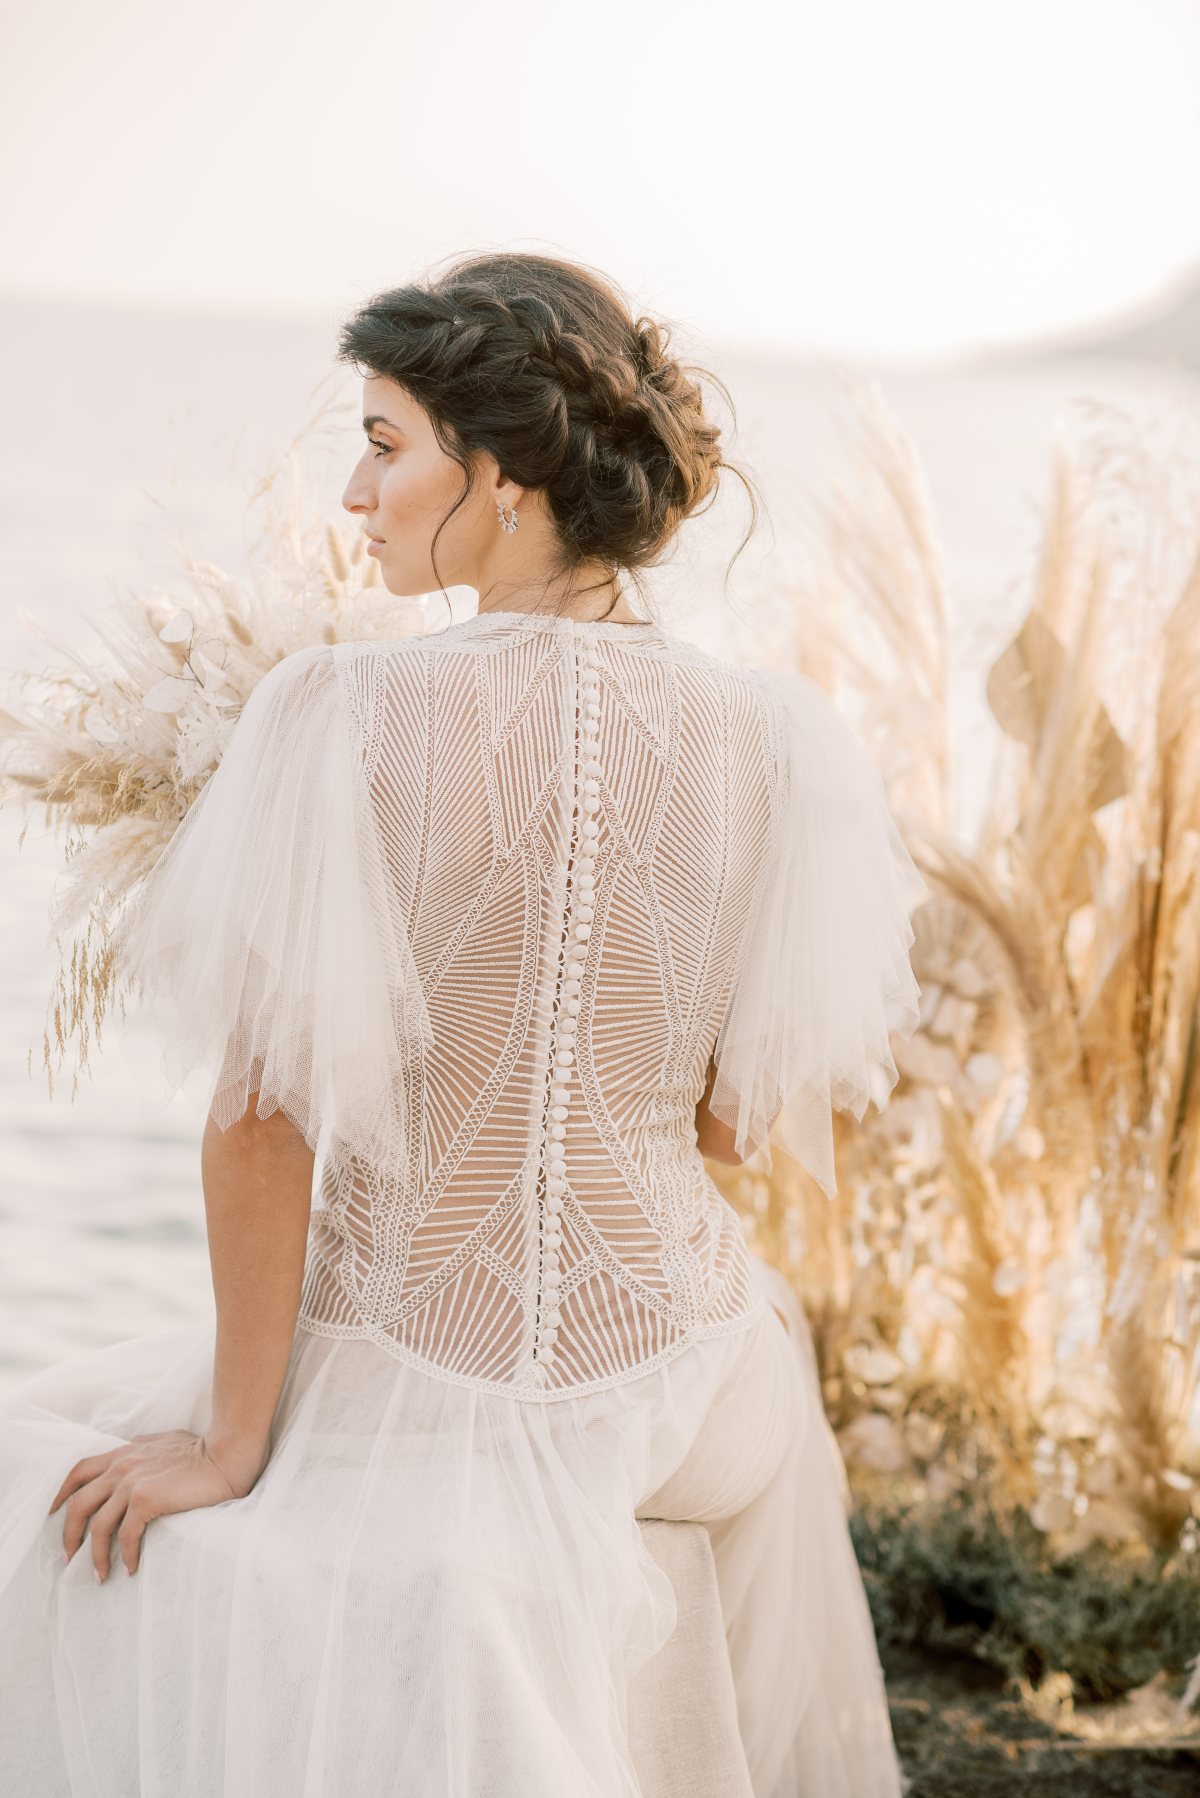 how to find a camera worthy dress - wedding photographer greece - les anagnou - wedding dress with beautiful back